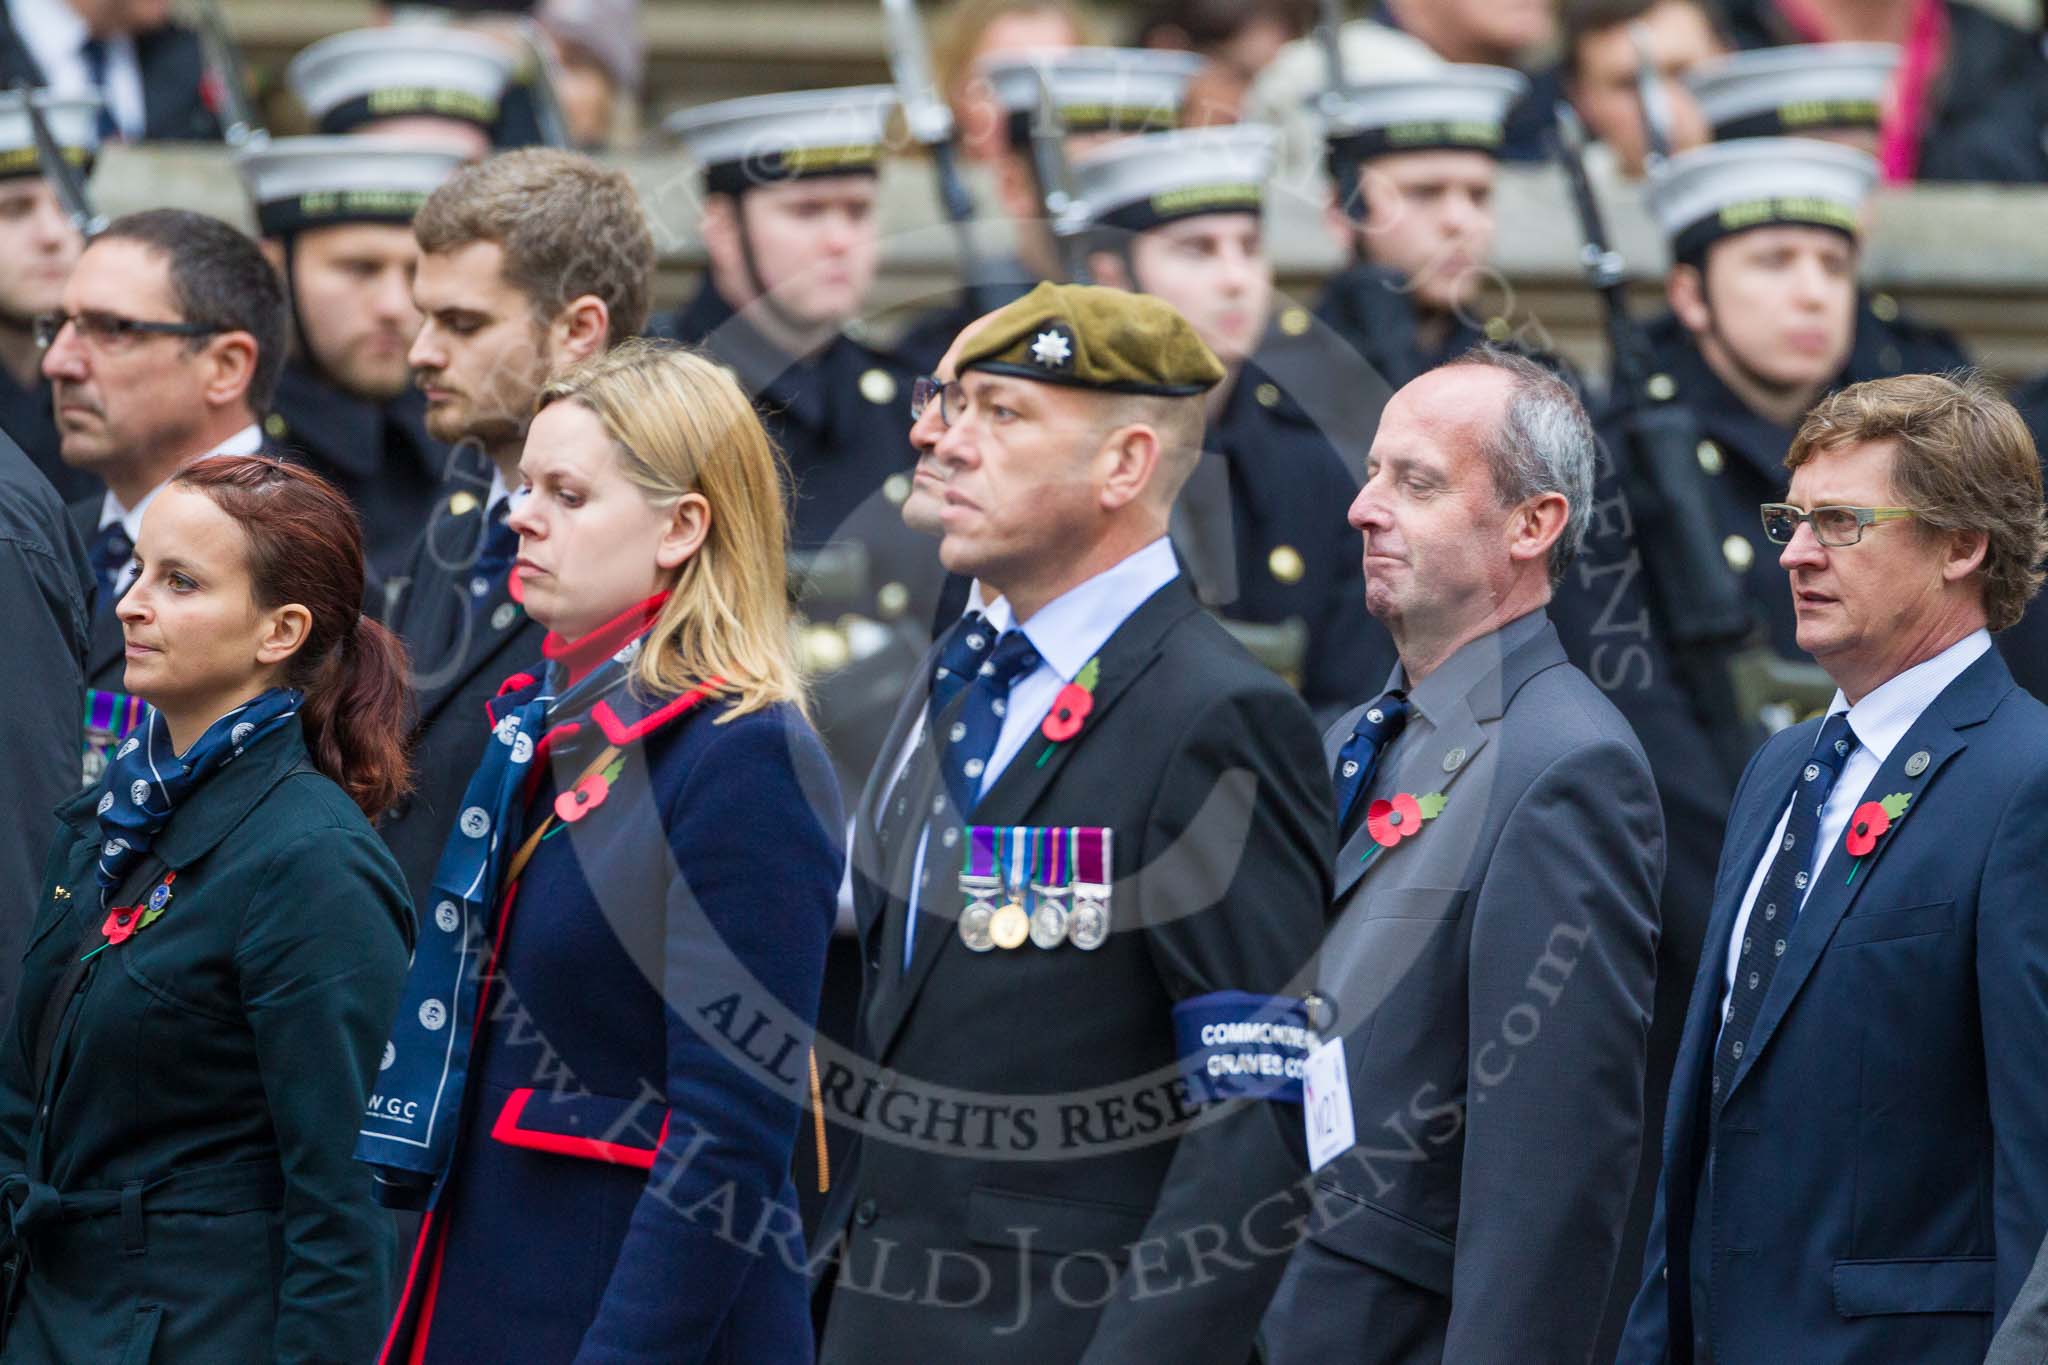 Remembrance Sunday at the Cenotaph 2015: Group M21, Commonwealth War Graves Commission.
Cenotaph, Whitehall, London SW1,
London,
Greater London,
United Kingdom,
on 08 November 2015 at 12:17, image #1546